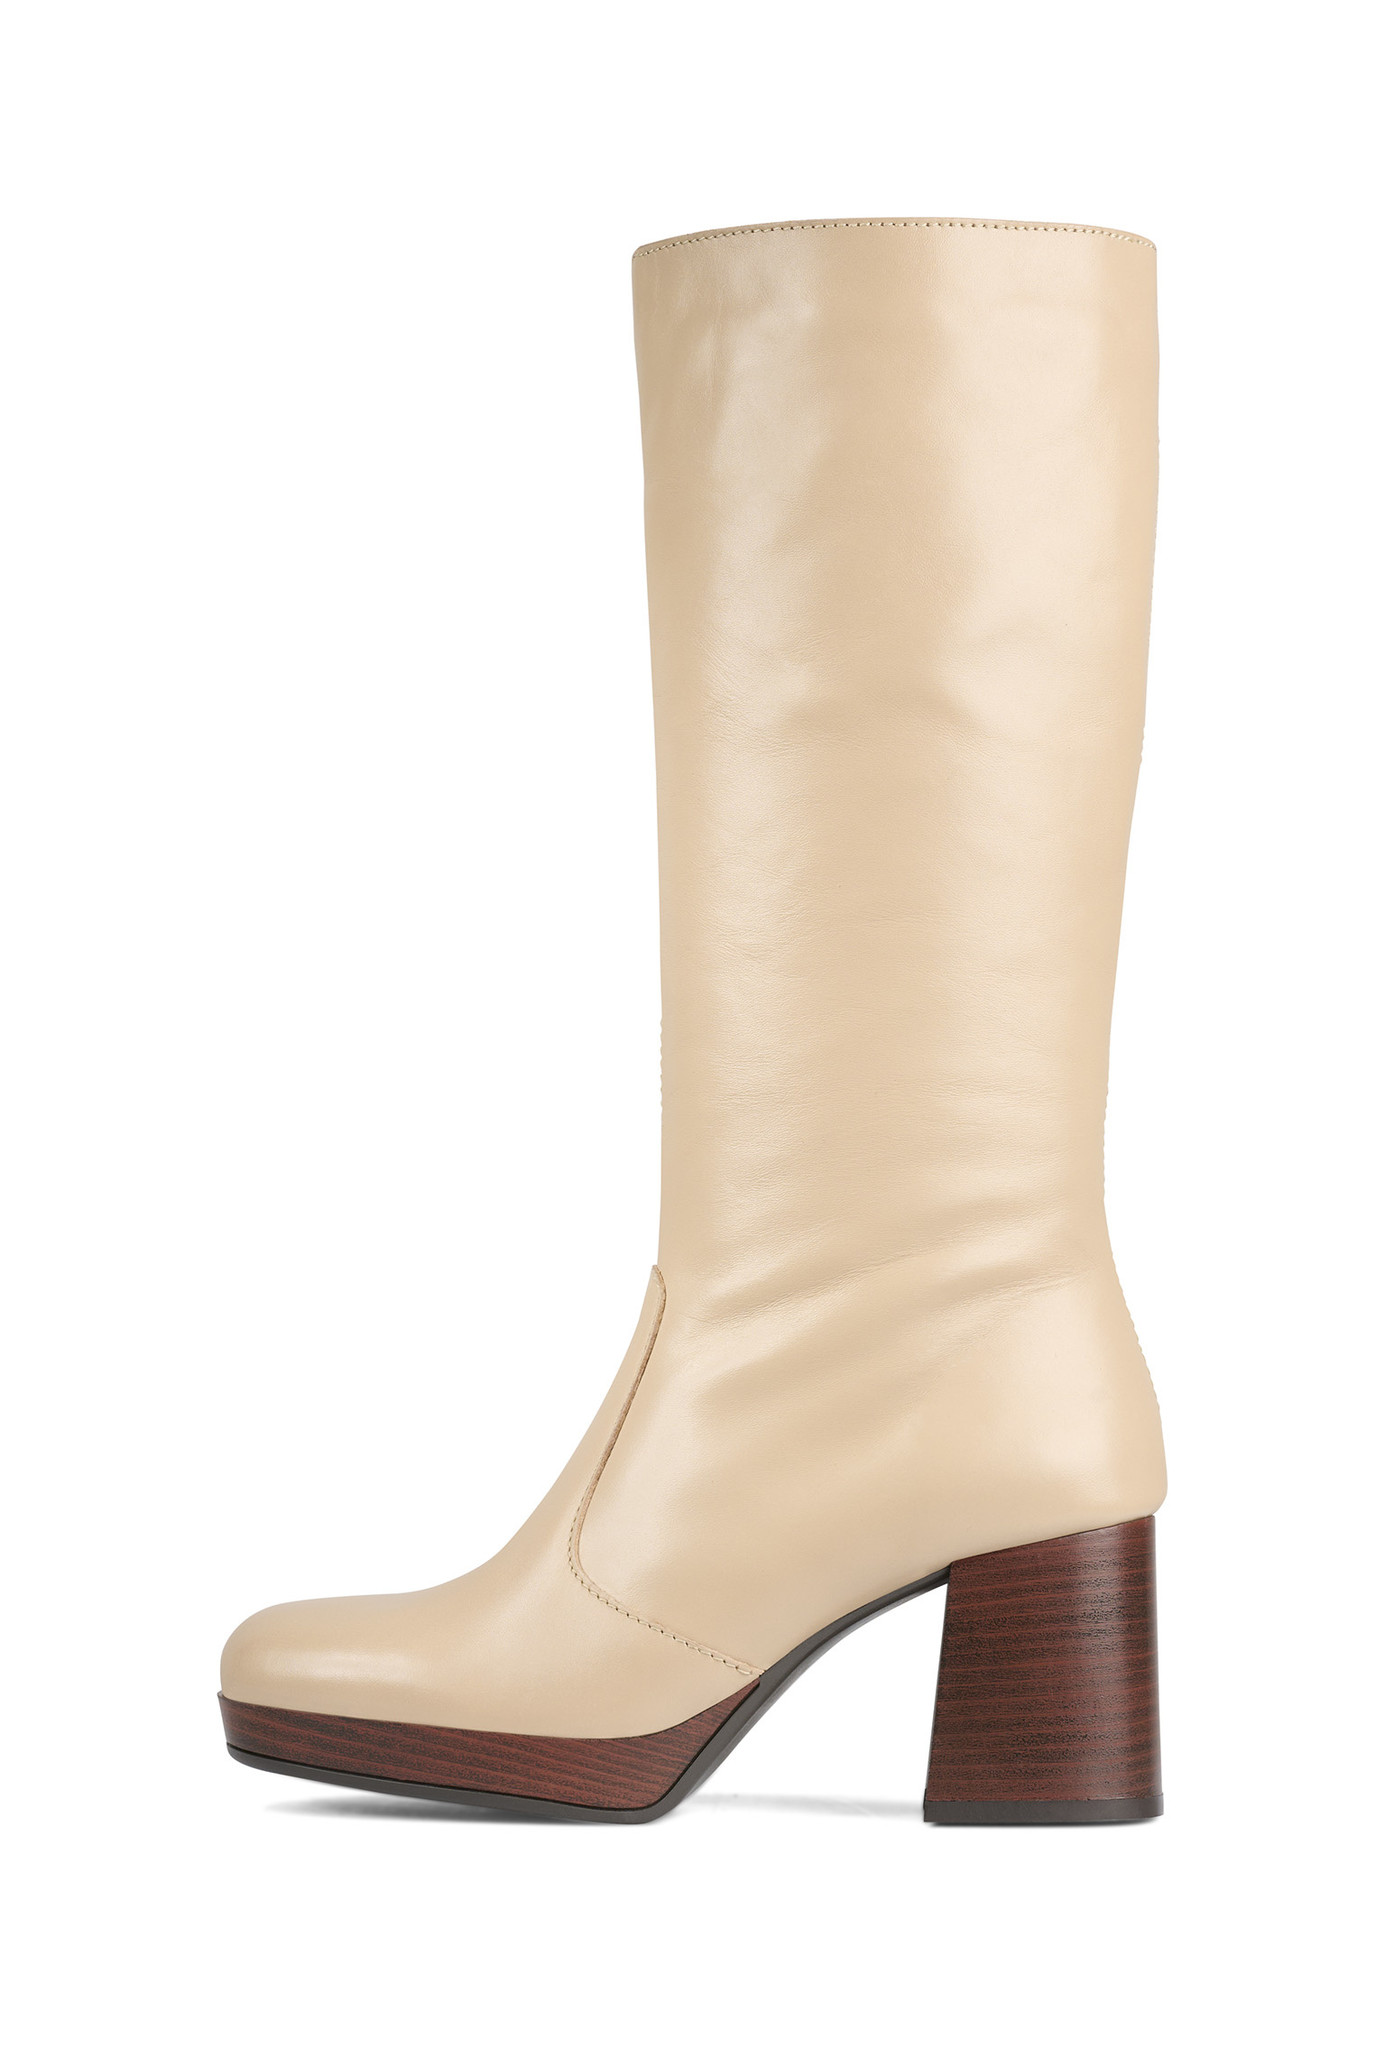 Boot Beige/Taupe 256502E7L_BEIGTD | Bullboxer - Bullboxer